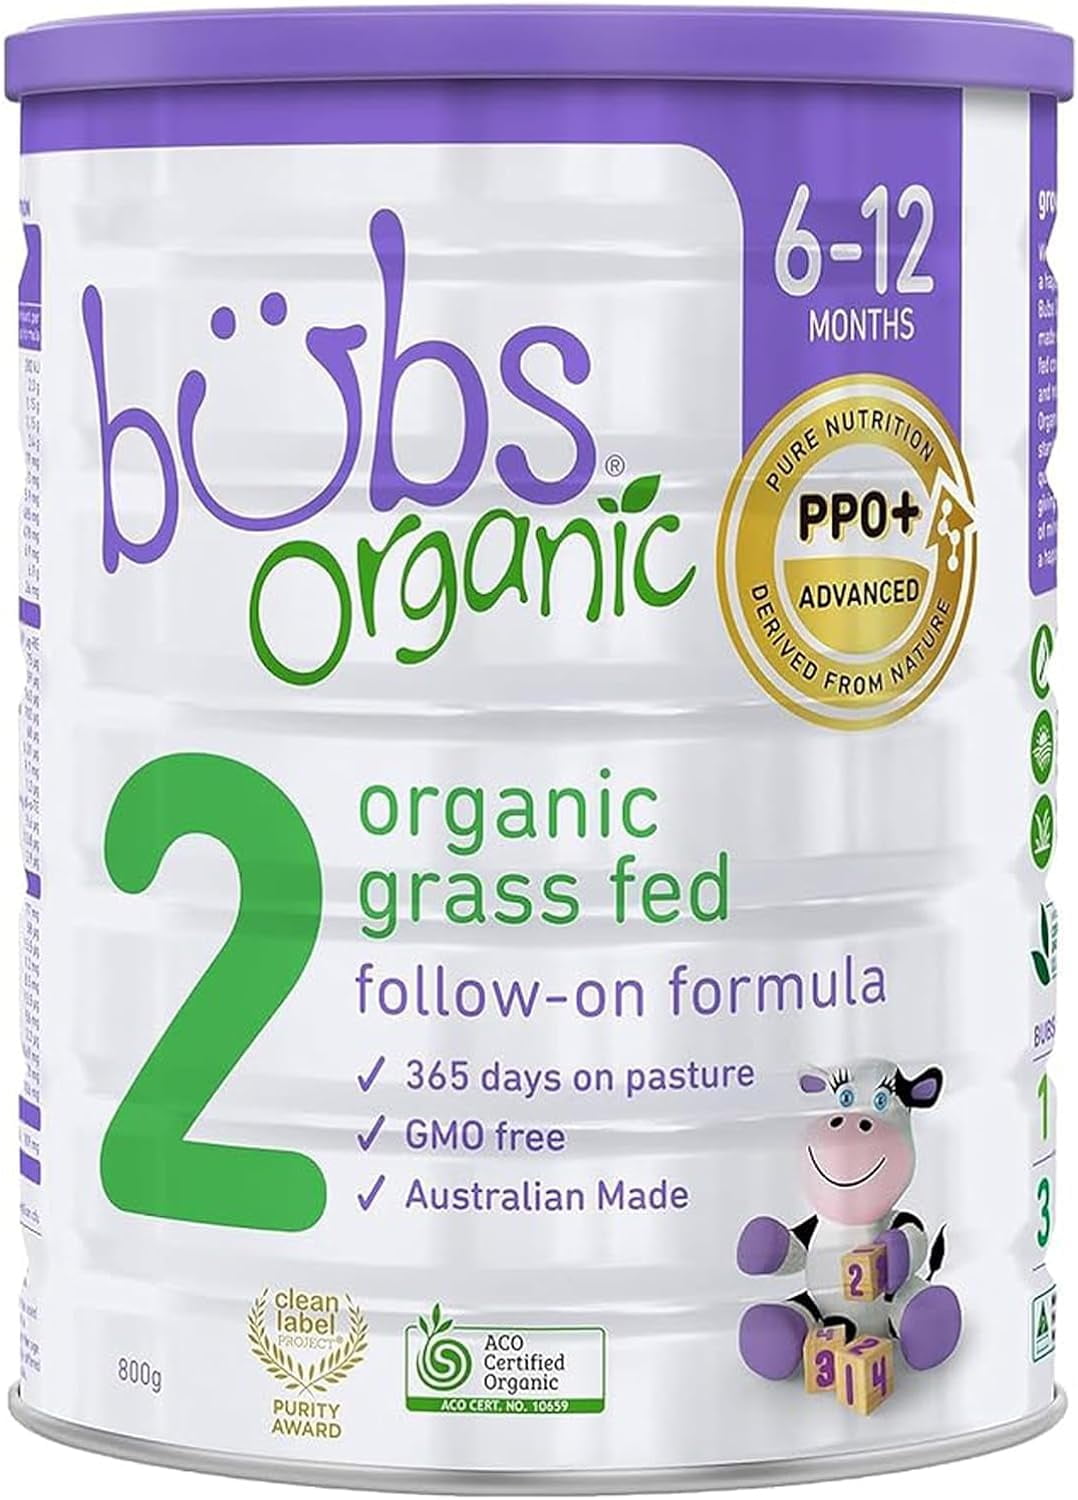 Grass Fed Oz with Infants Made Stage Milk, 28.2 2, Organic Non-GMO months, Organic Bubs Follow-On Formula